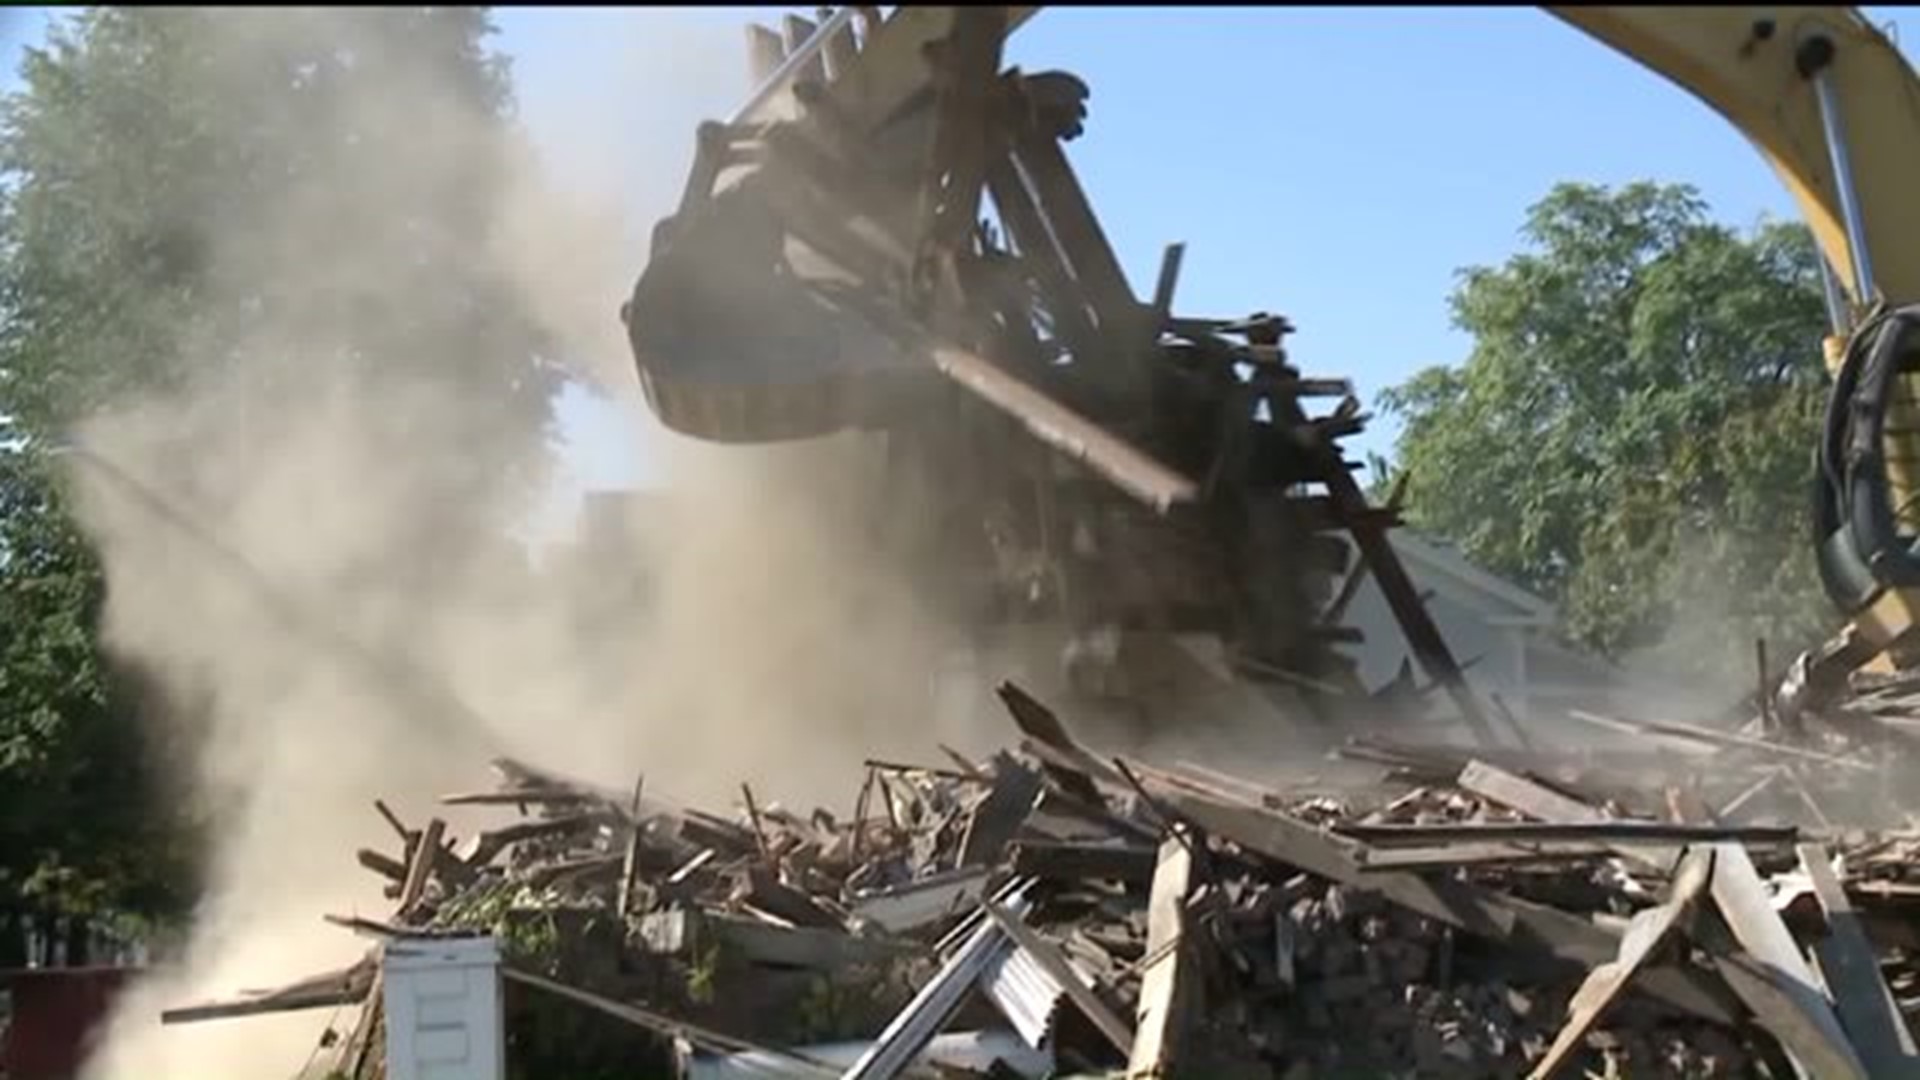 Condemned Homes in Wilkes-Barre Demolished